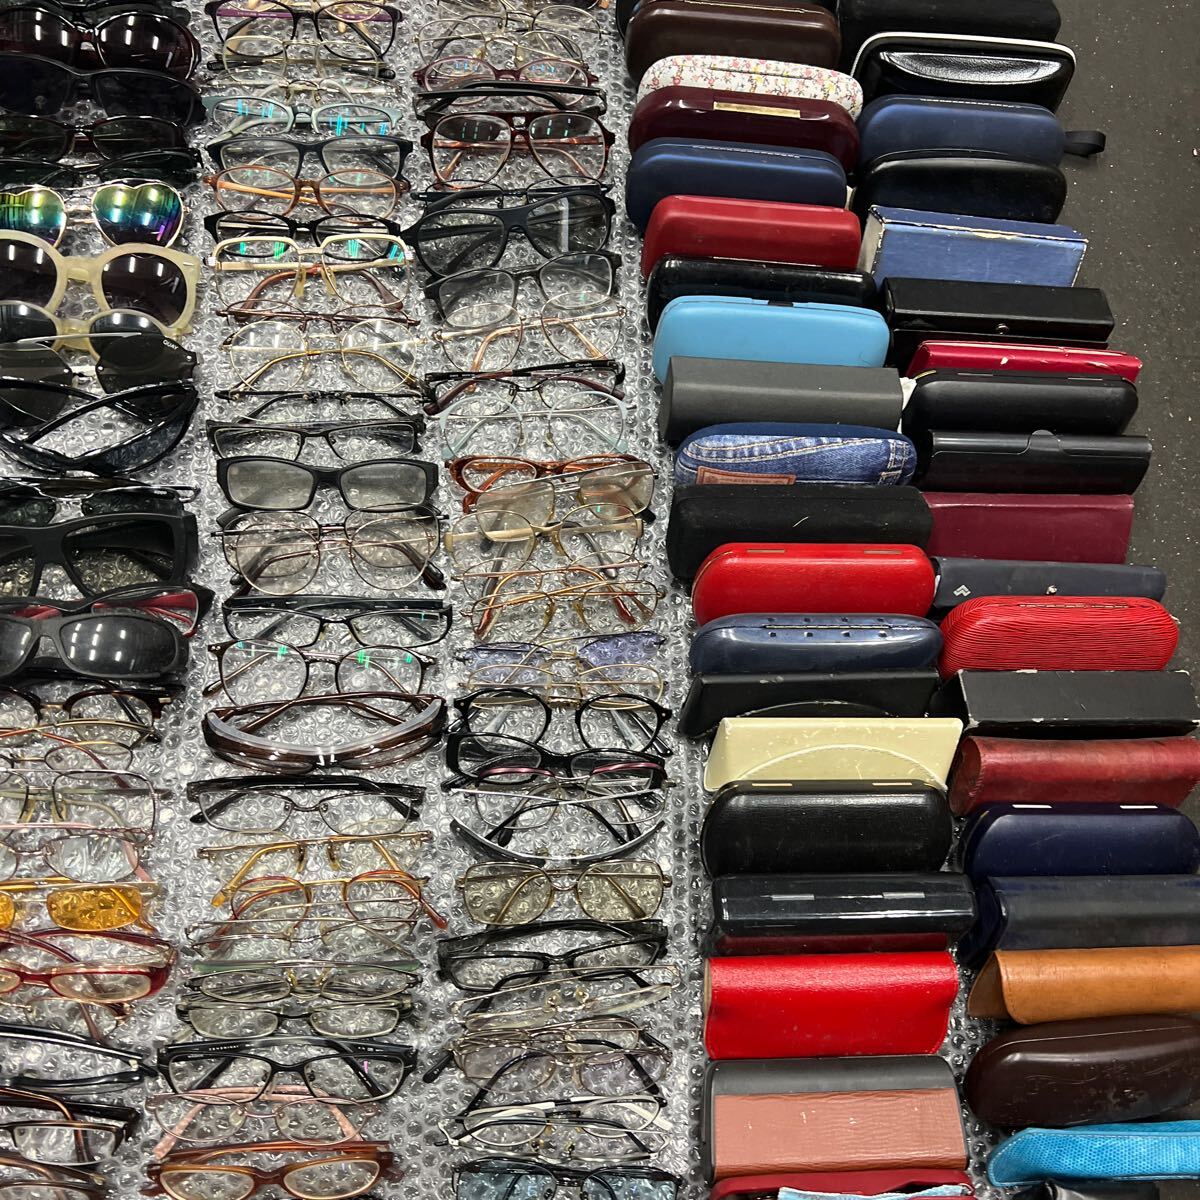  sunglasses glasses large amount approximately 400 piece and more summarize Junk 